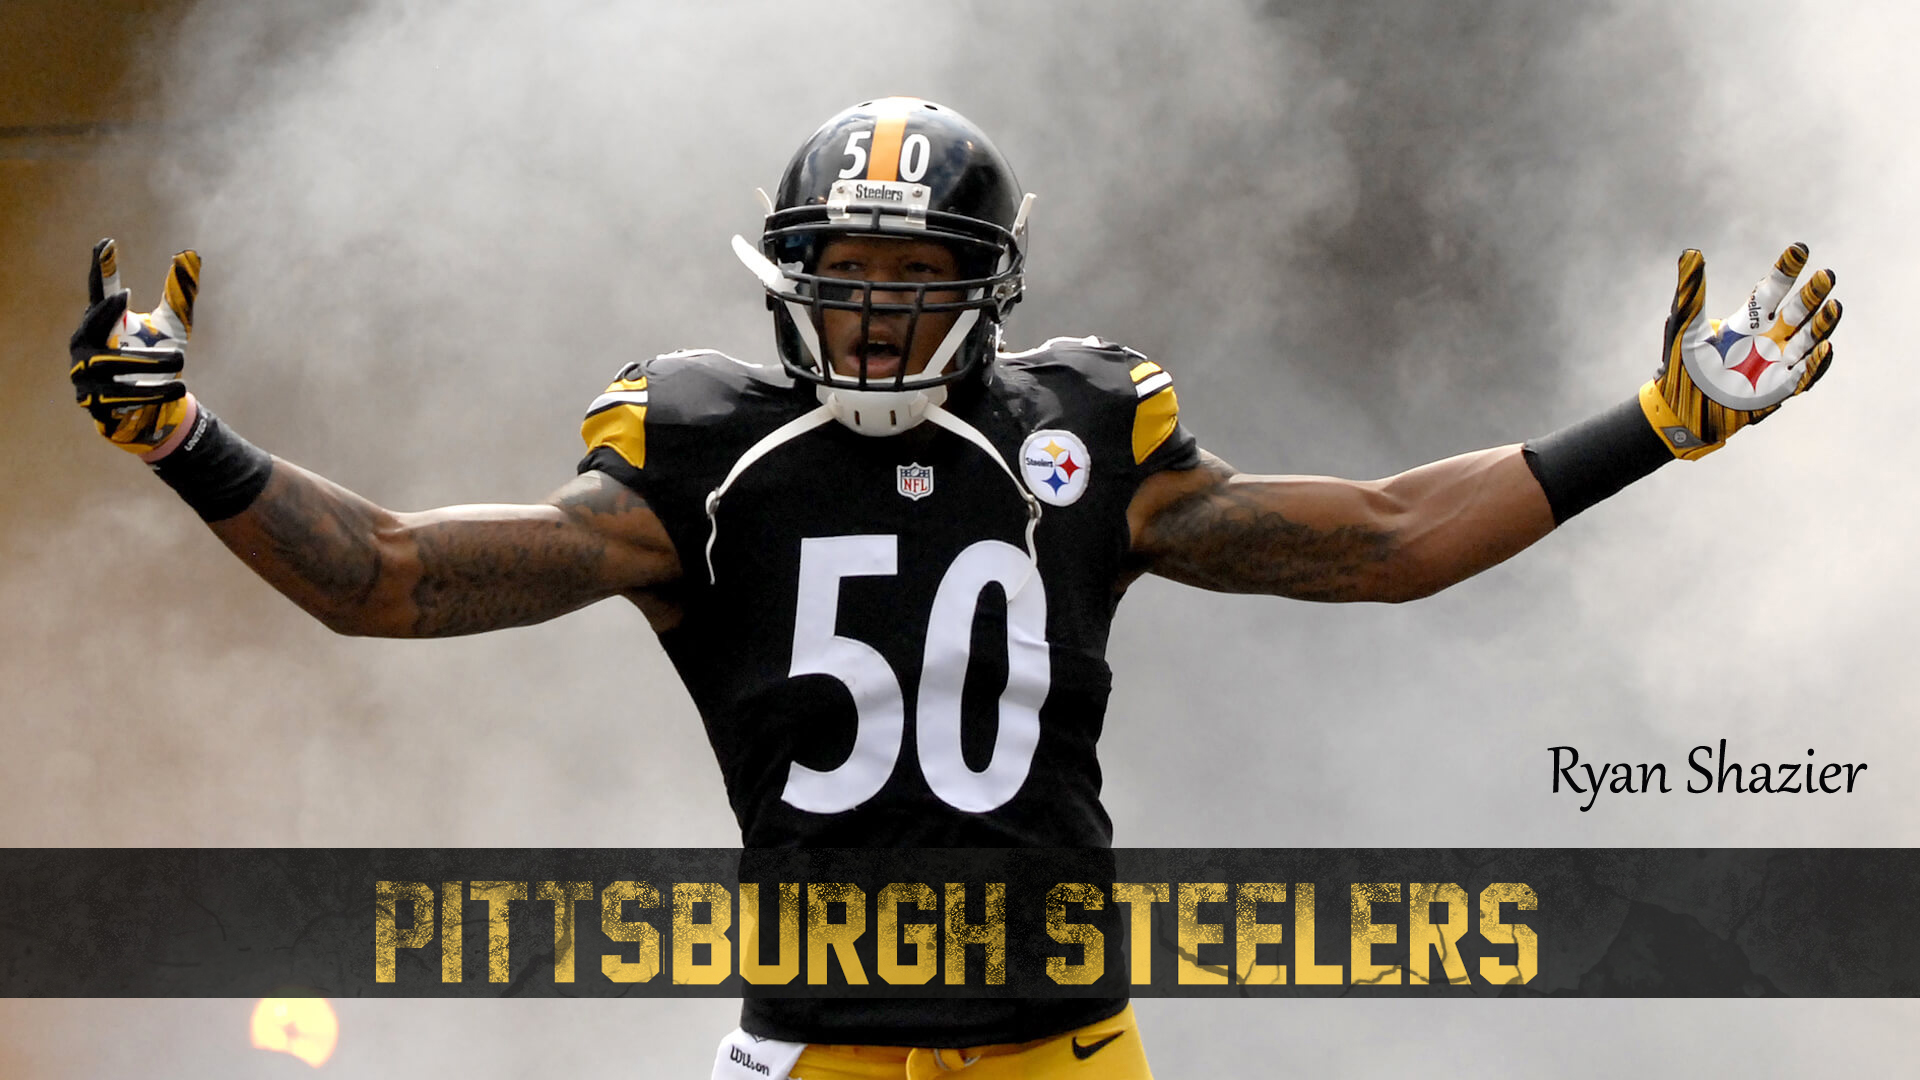 pittsburgh steelers hd wallpaper background image on steelers players wallpapers